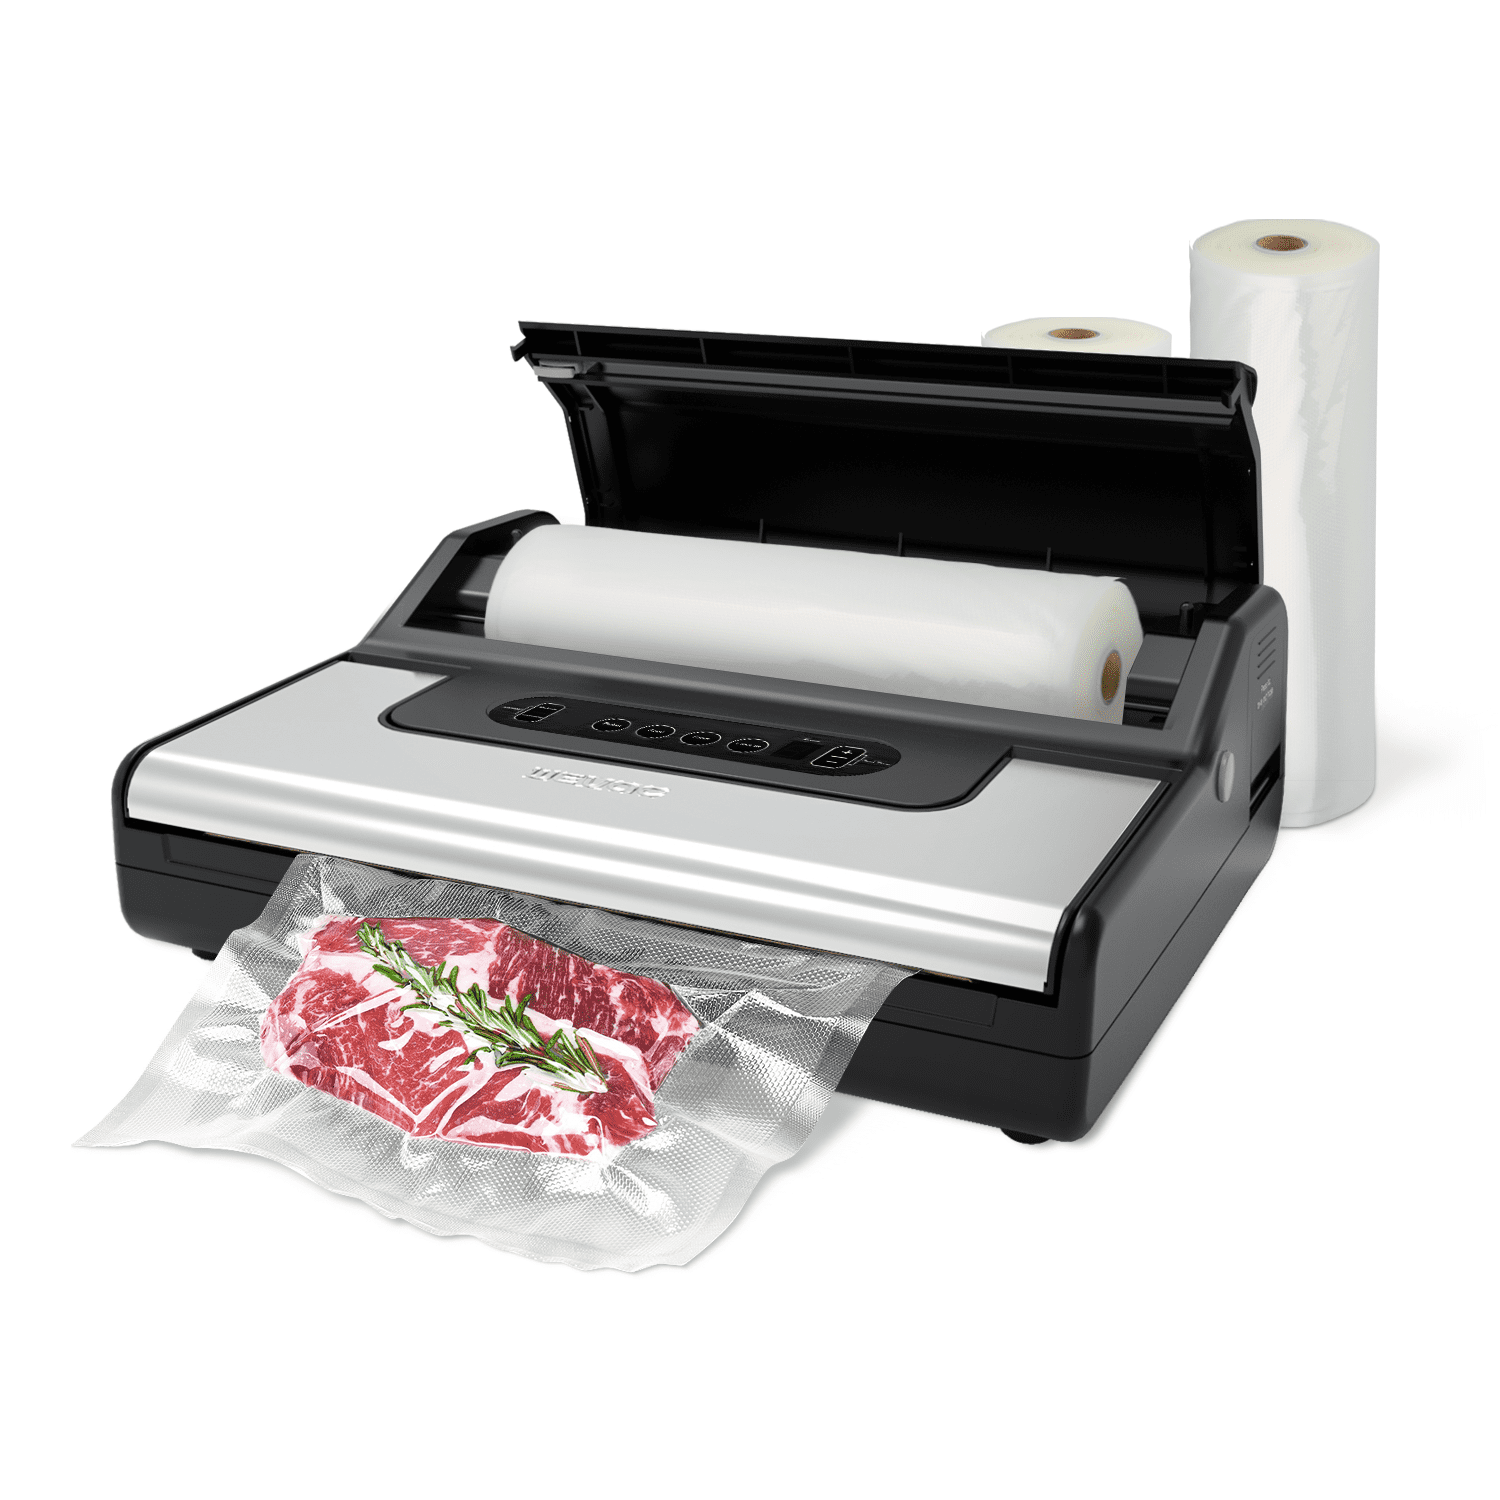 Wholesale Wevac Vacuum Sealer Bags Products at Factory Prices from